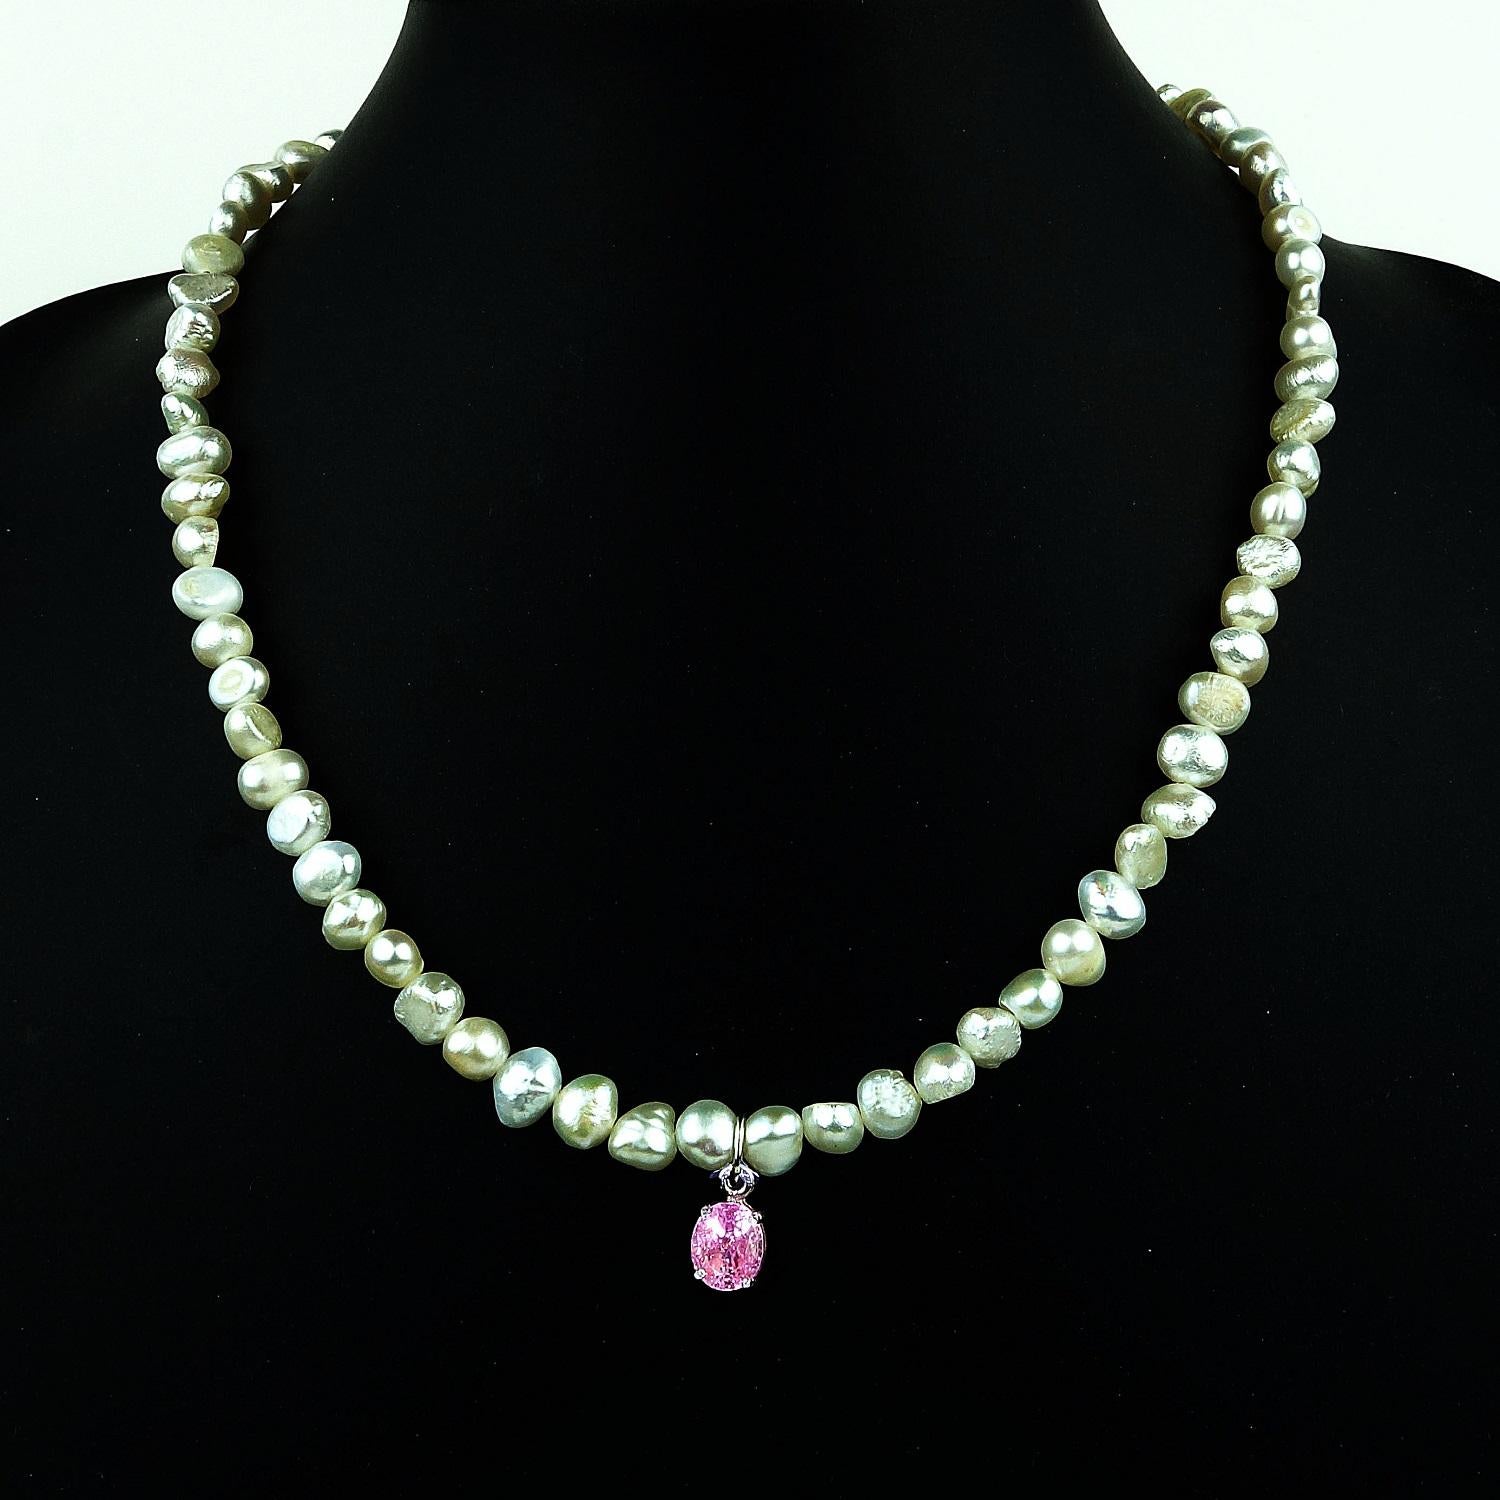 Women's AJD White Pearl Choker Necklace with Pink Spinel